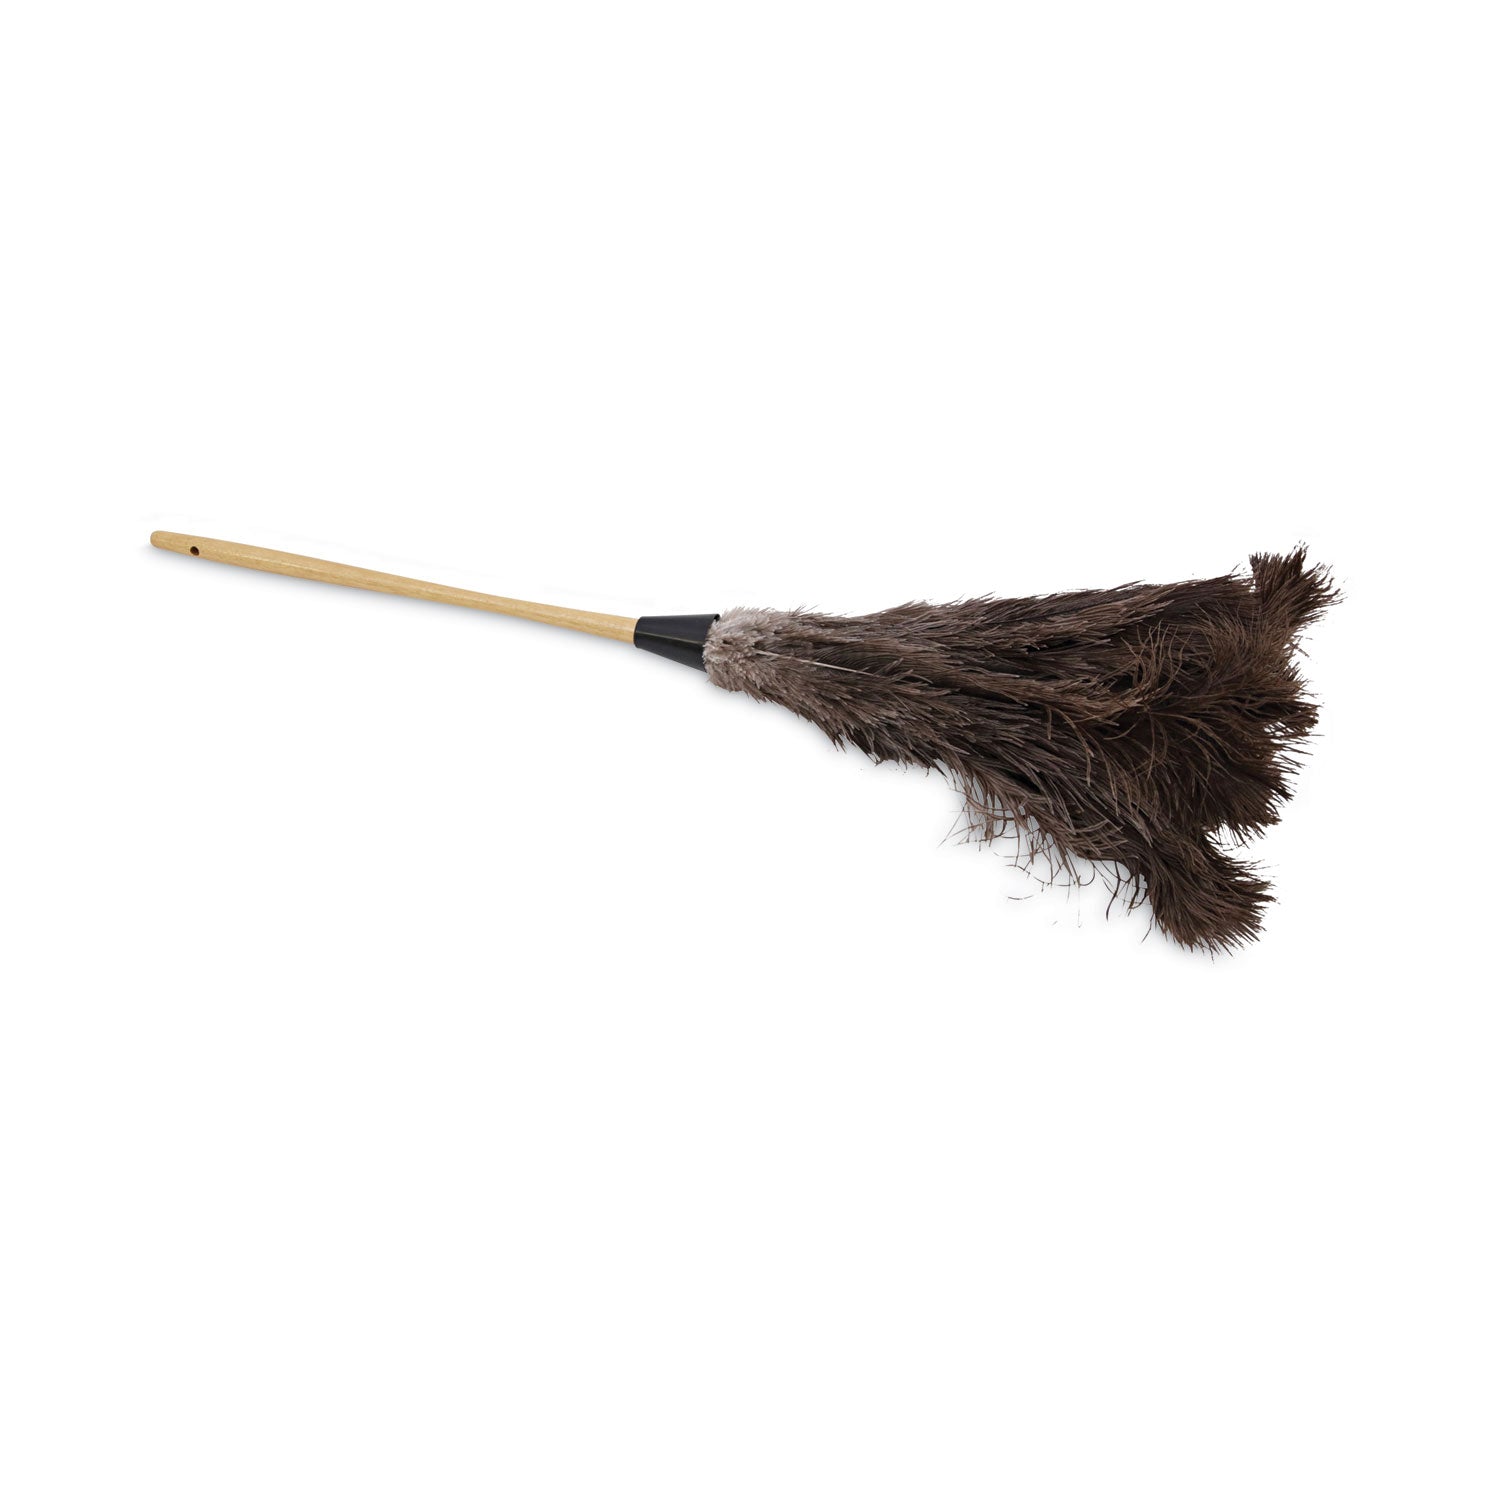 professional-ostrich-feather-duster-16-handle_bwk28gy - 1